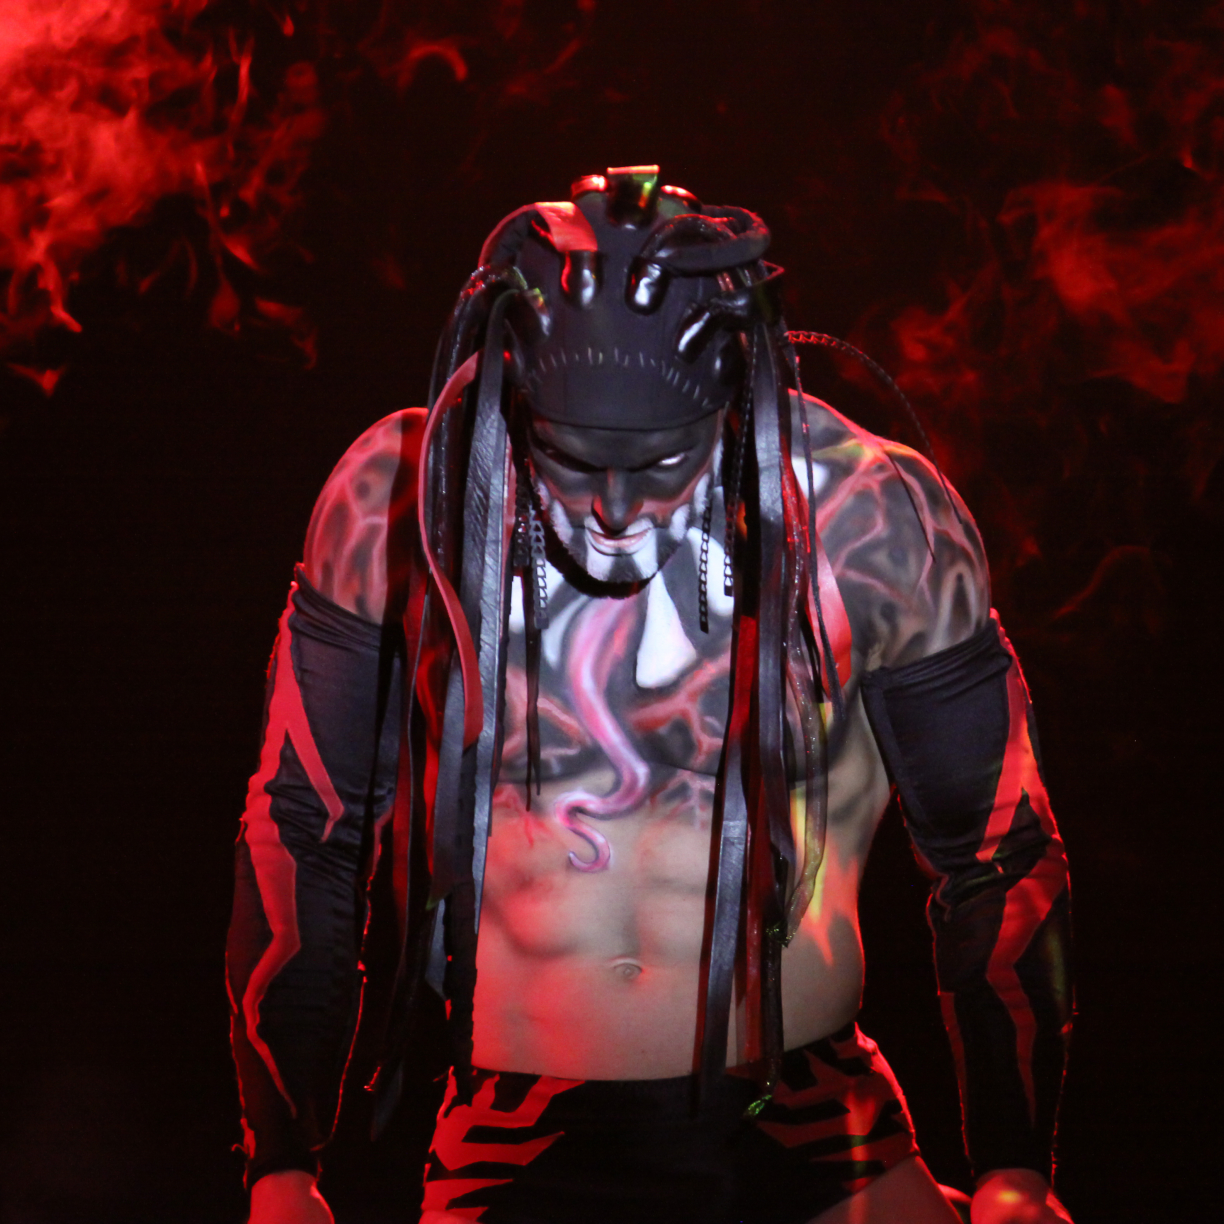 finn balor iphone wallpaper,red,performance,darkness,outerwear,stage